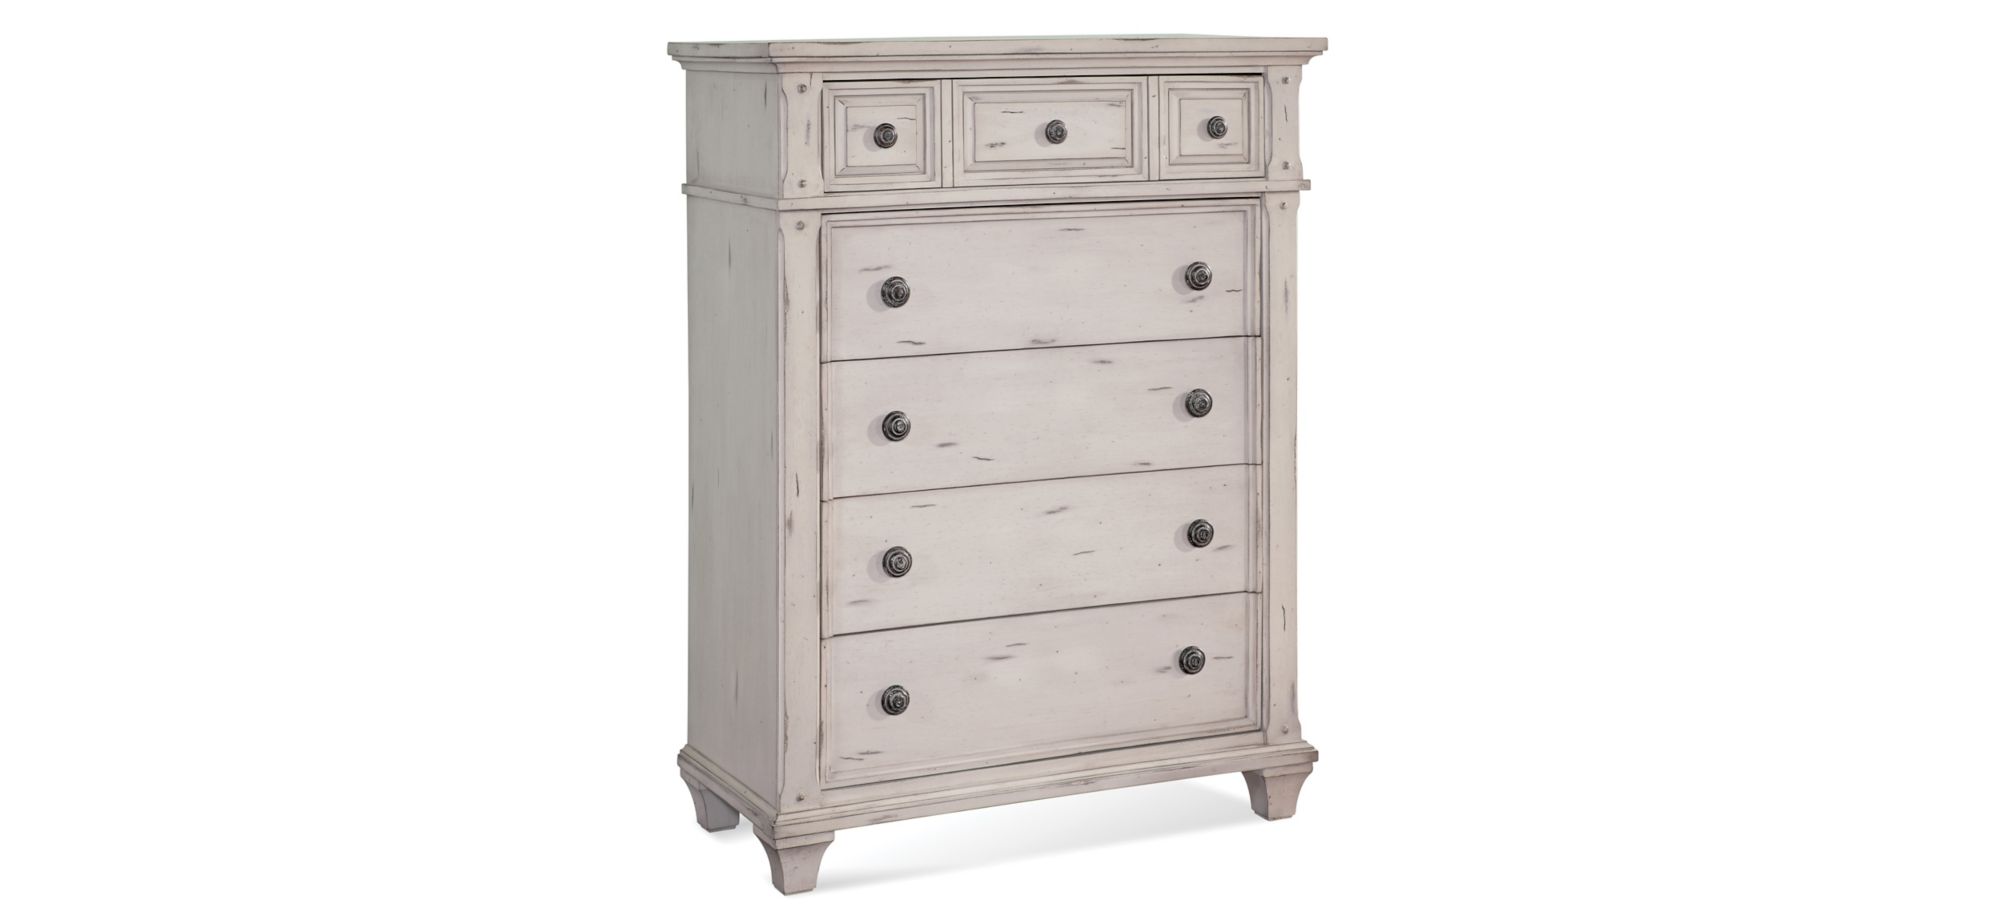 Sedona Chest in Cobblestone White by American Woodcrafters